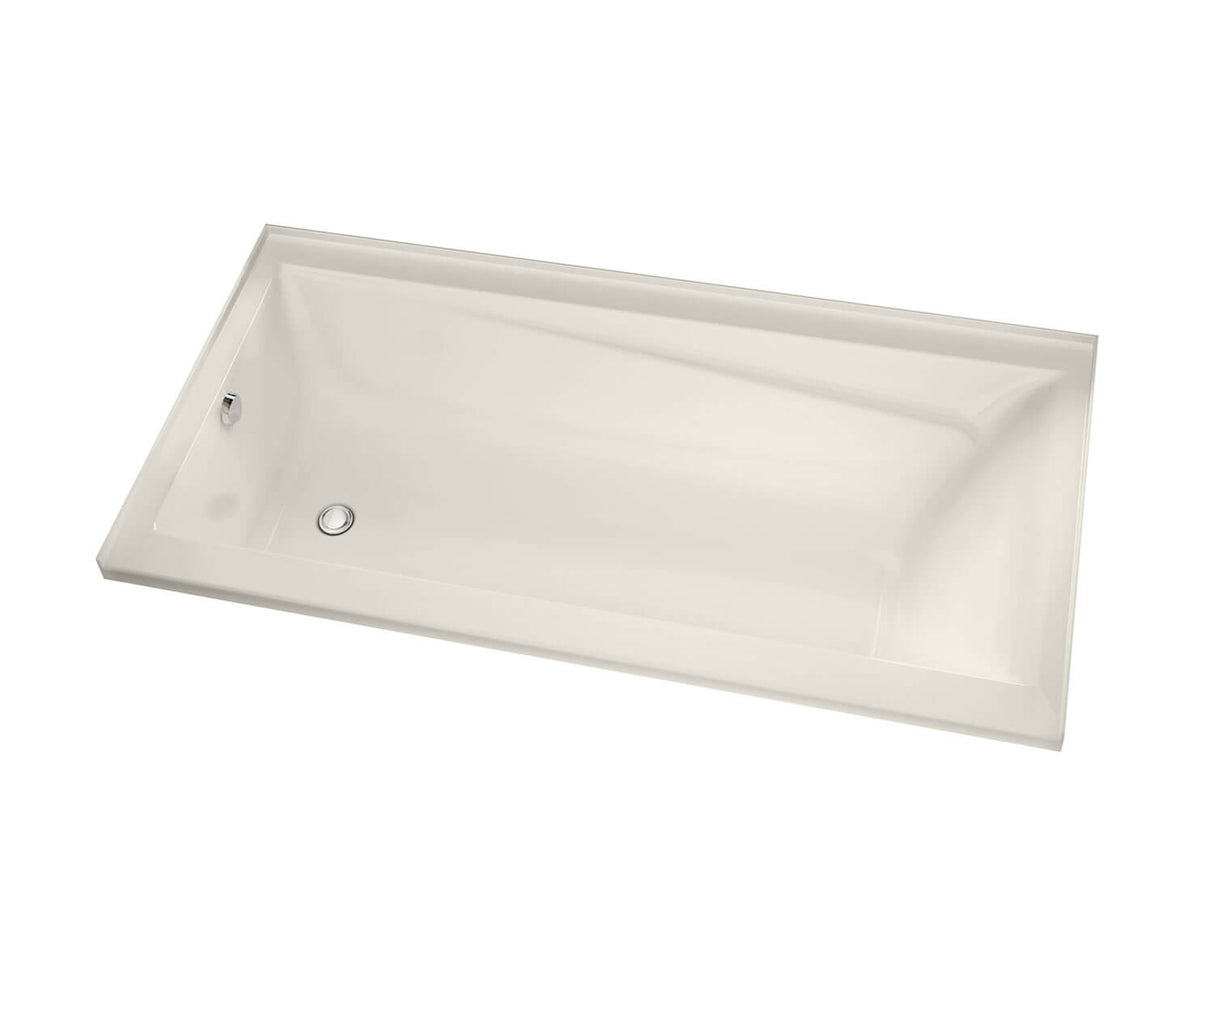 MAAX 106224-R-000-007 Exhibit 7232 IF Acrylic Alcove Right-Hand Drain Bathtub in Biscuit